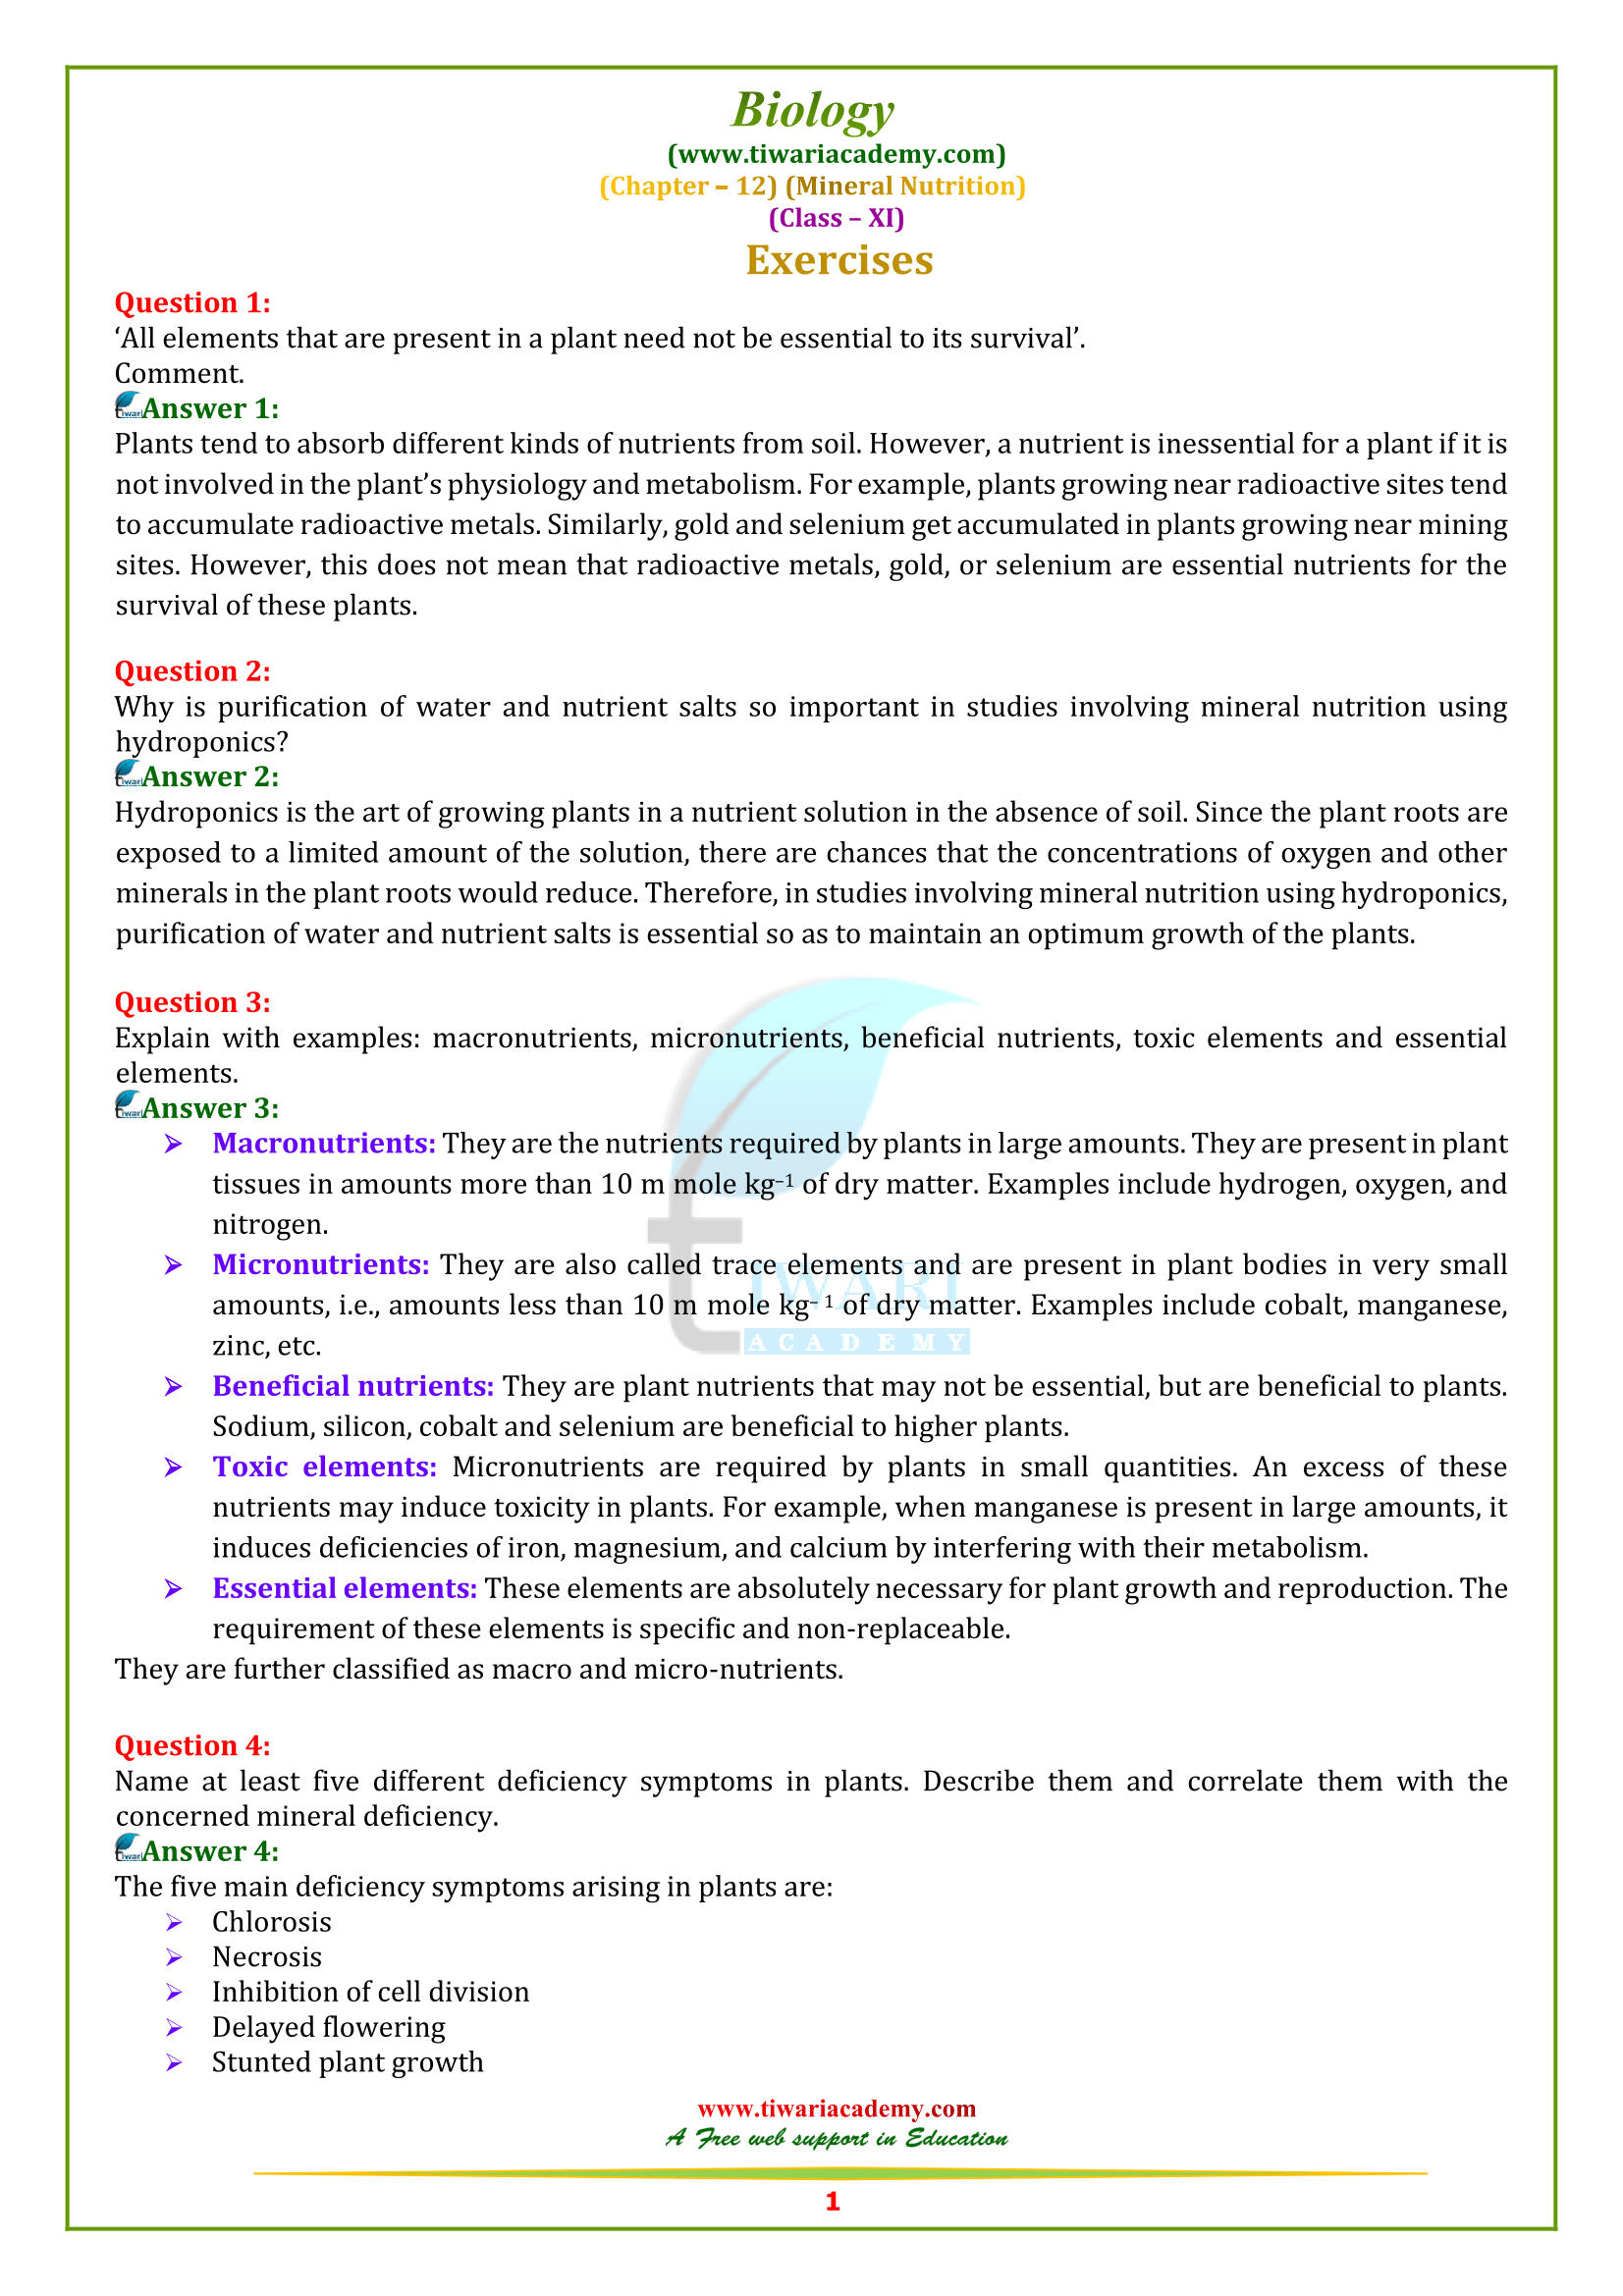 NCERT Solutions for Class 11 Biology Chapter 12 Mineral Nutrition